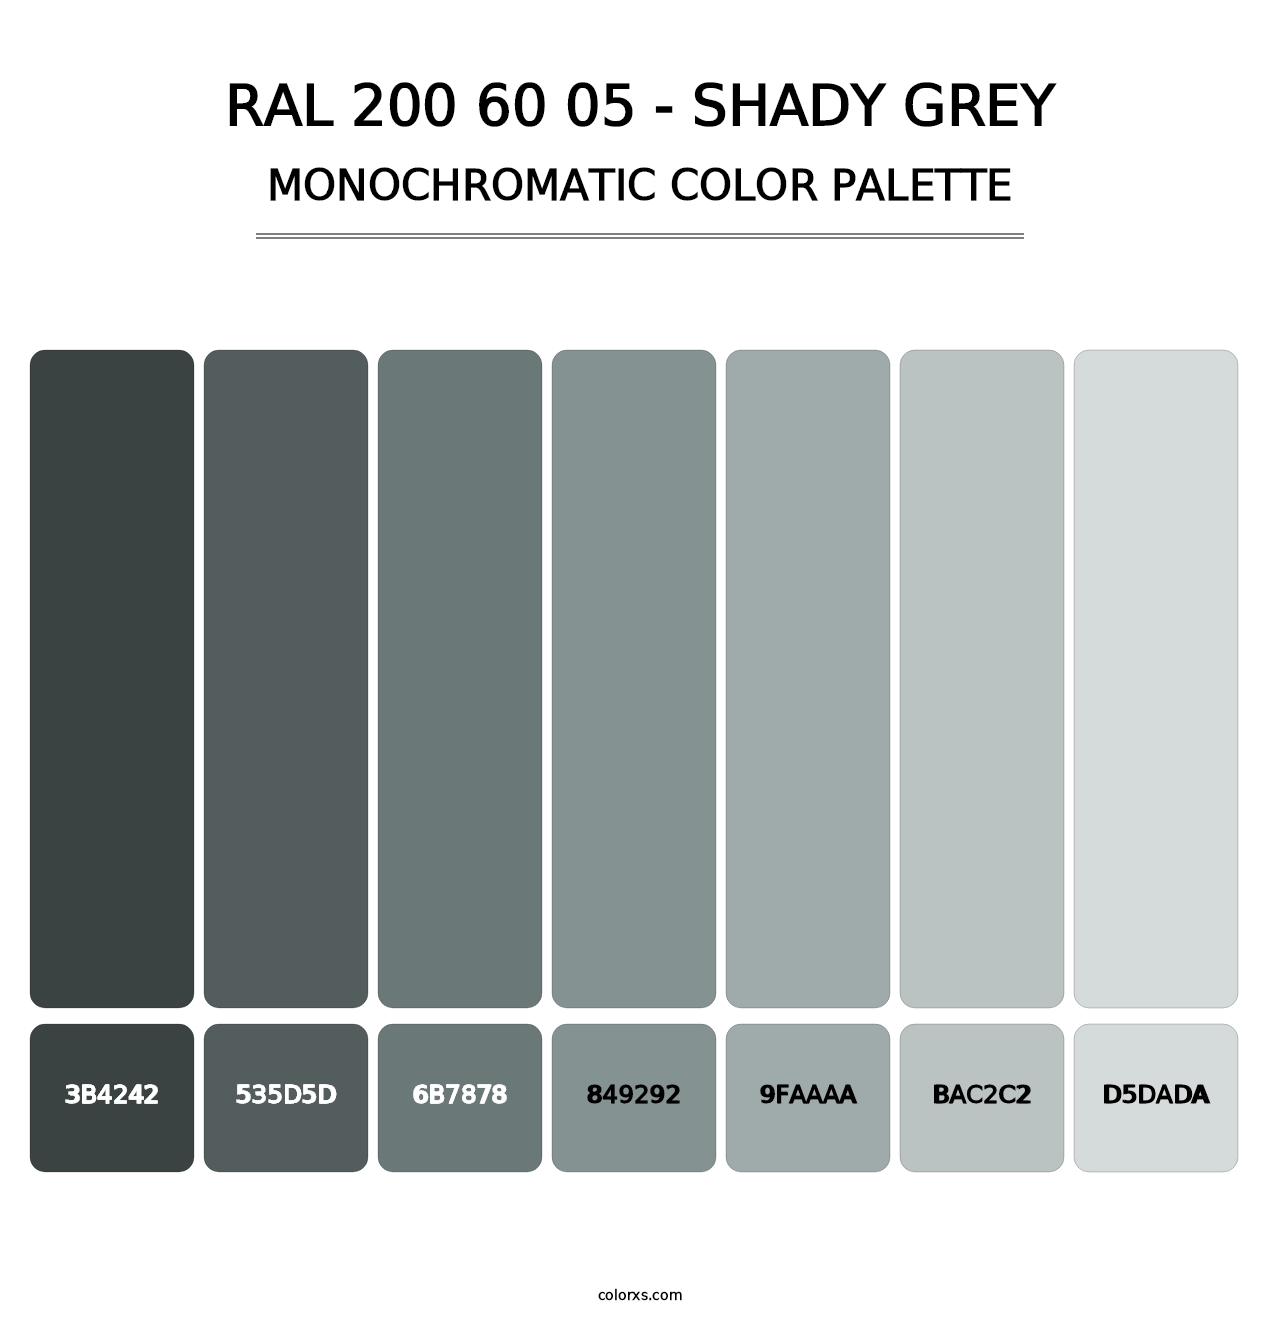 RAL 200 60 05 - Shady Grey - Monochromatic Color Palette